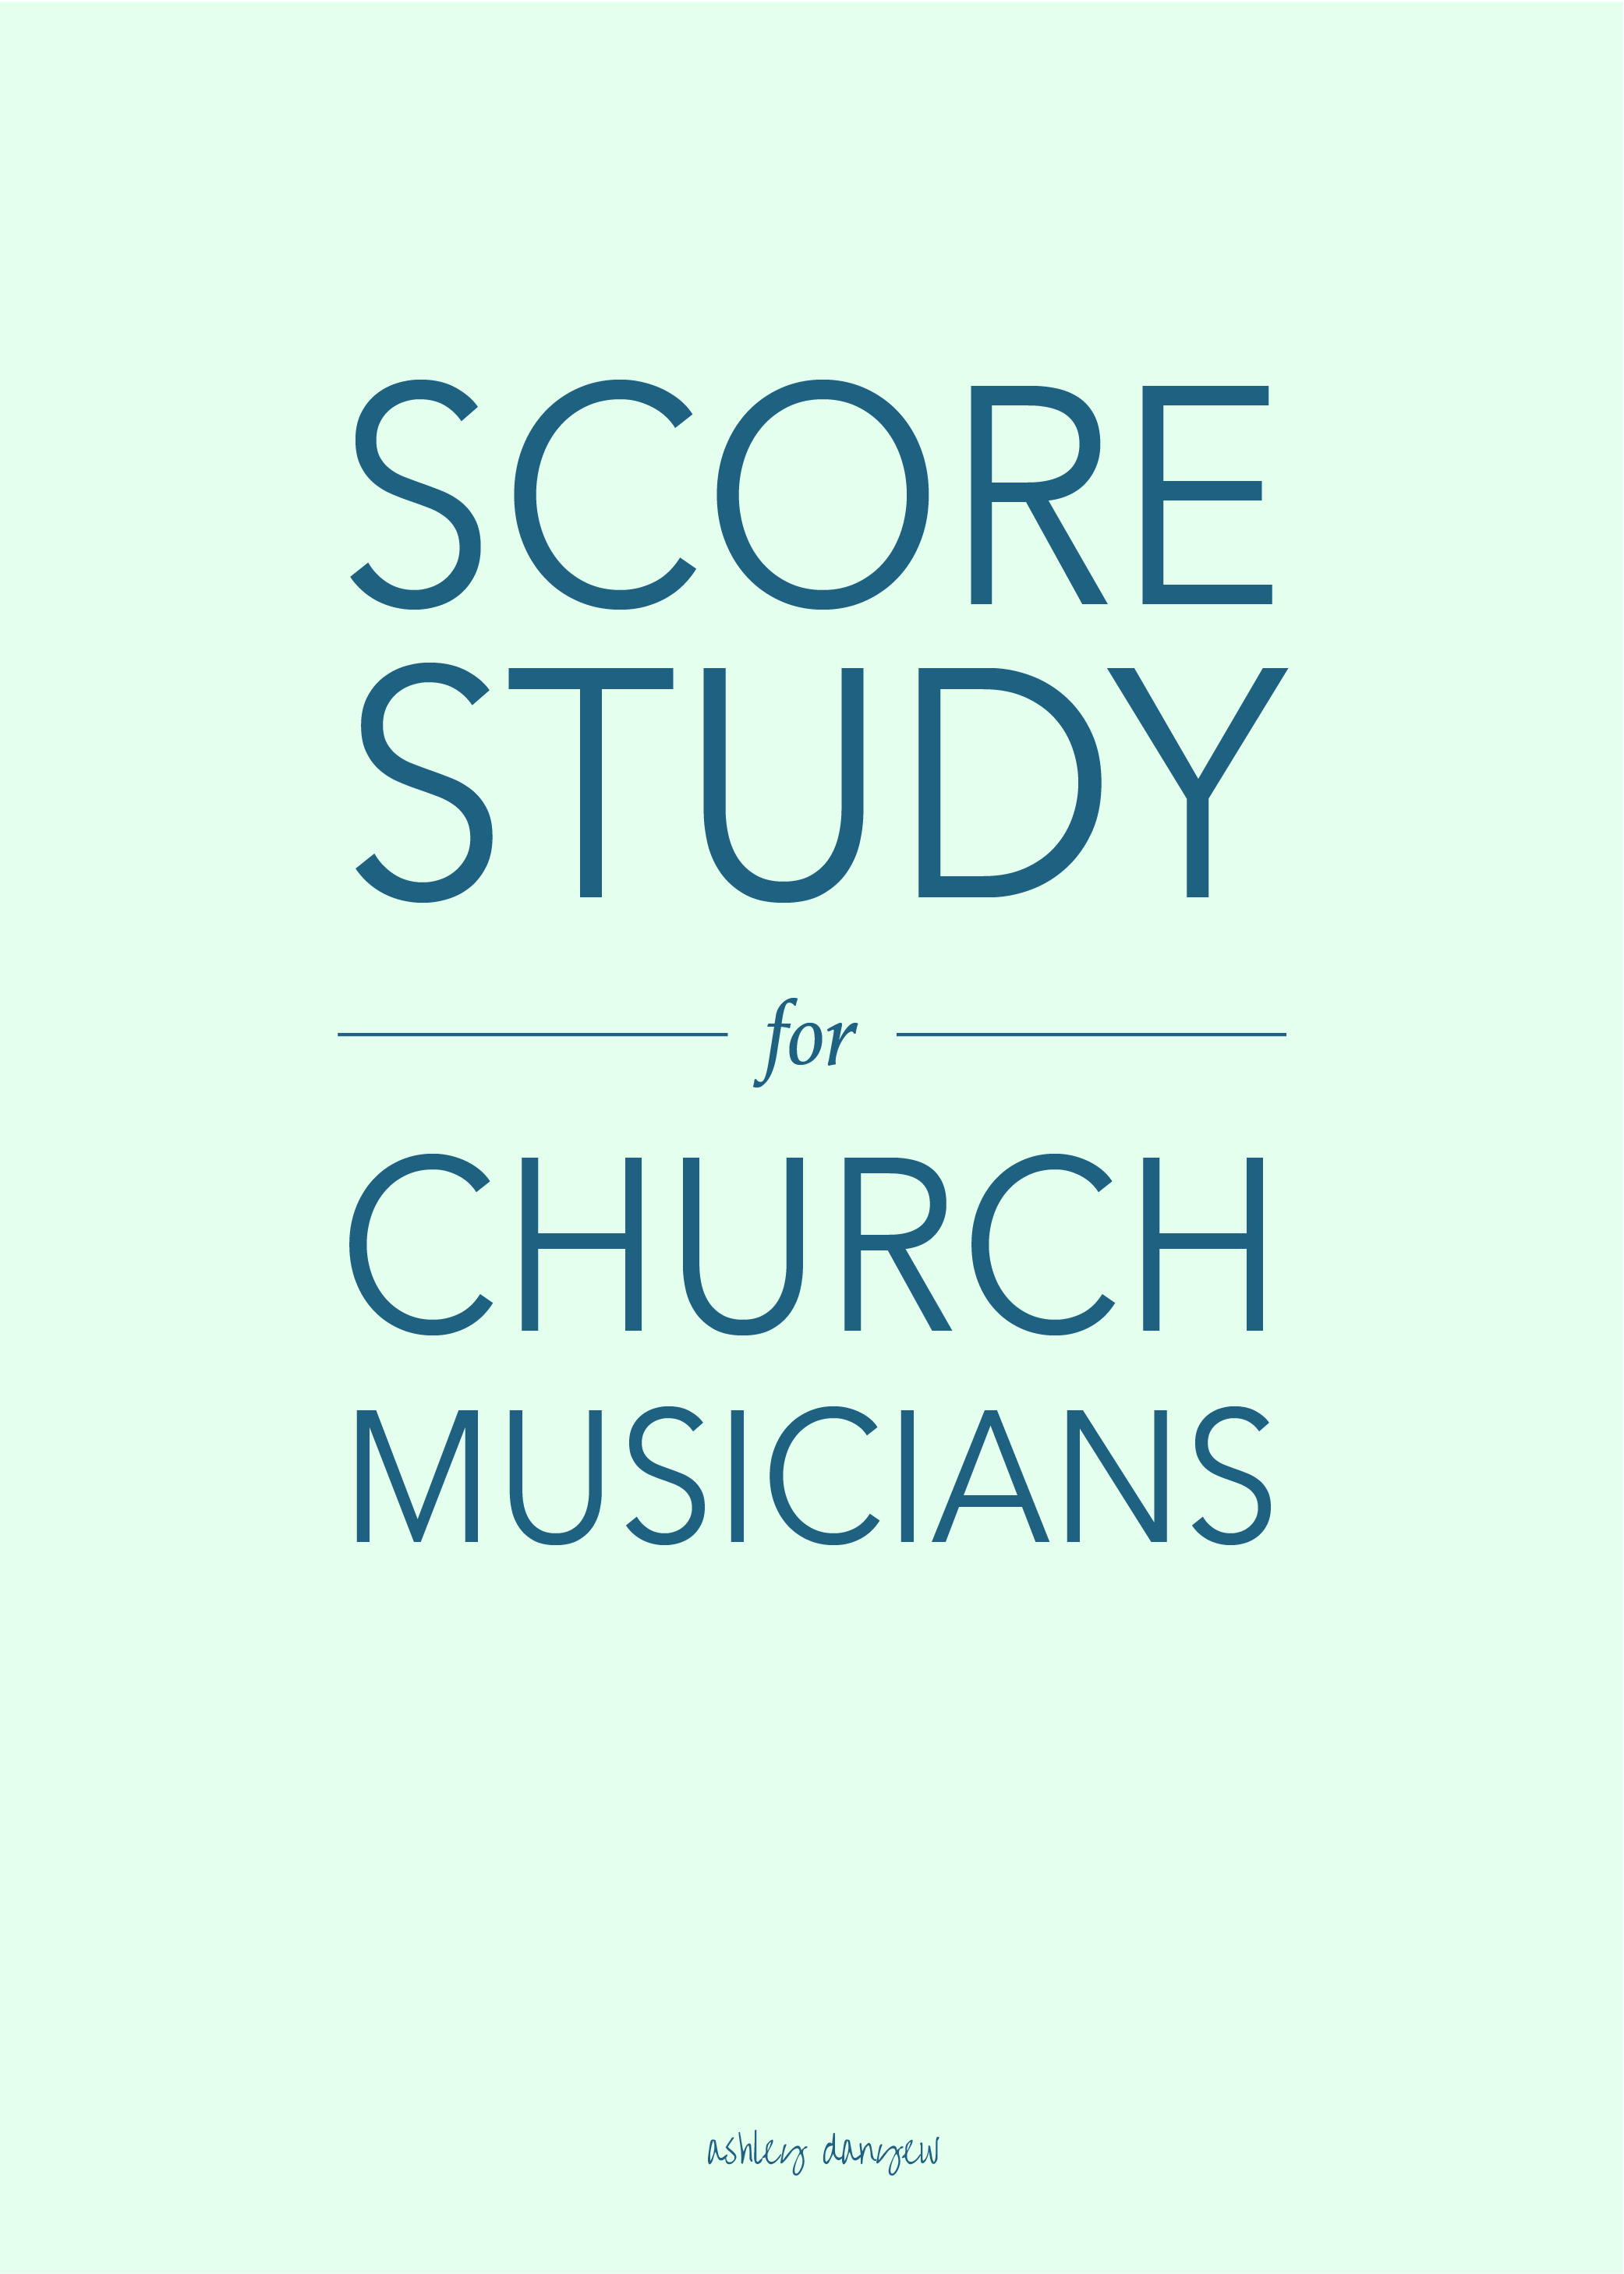 Copy of Score-Study for Church Musicians